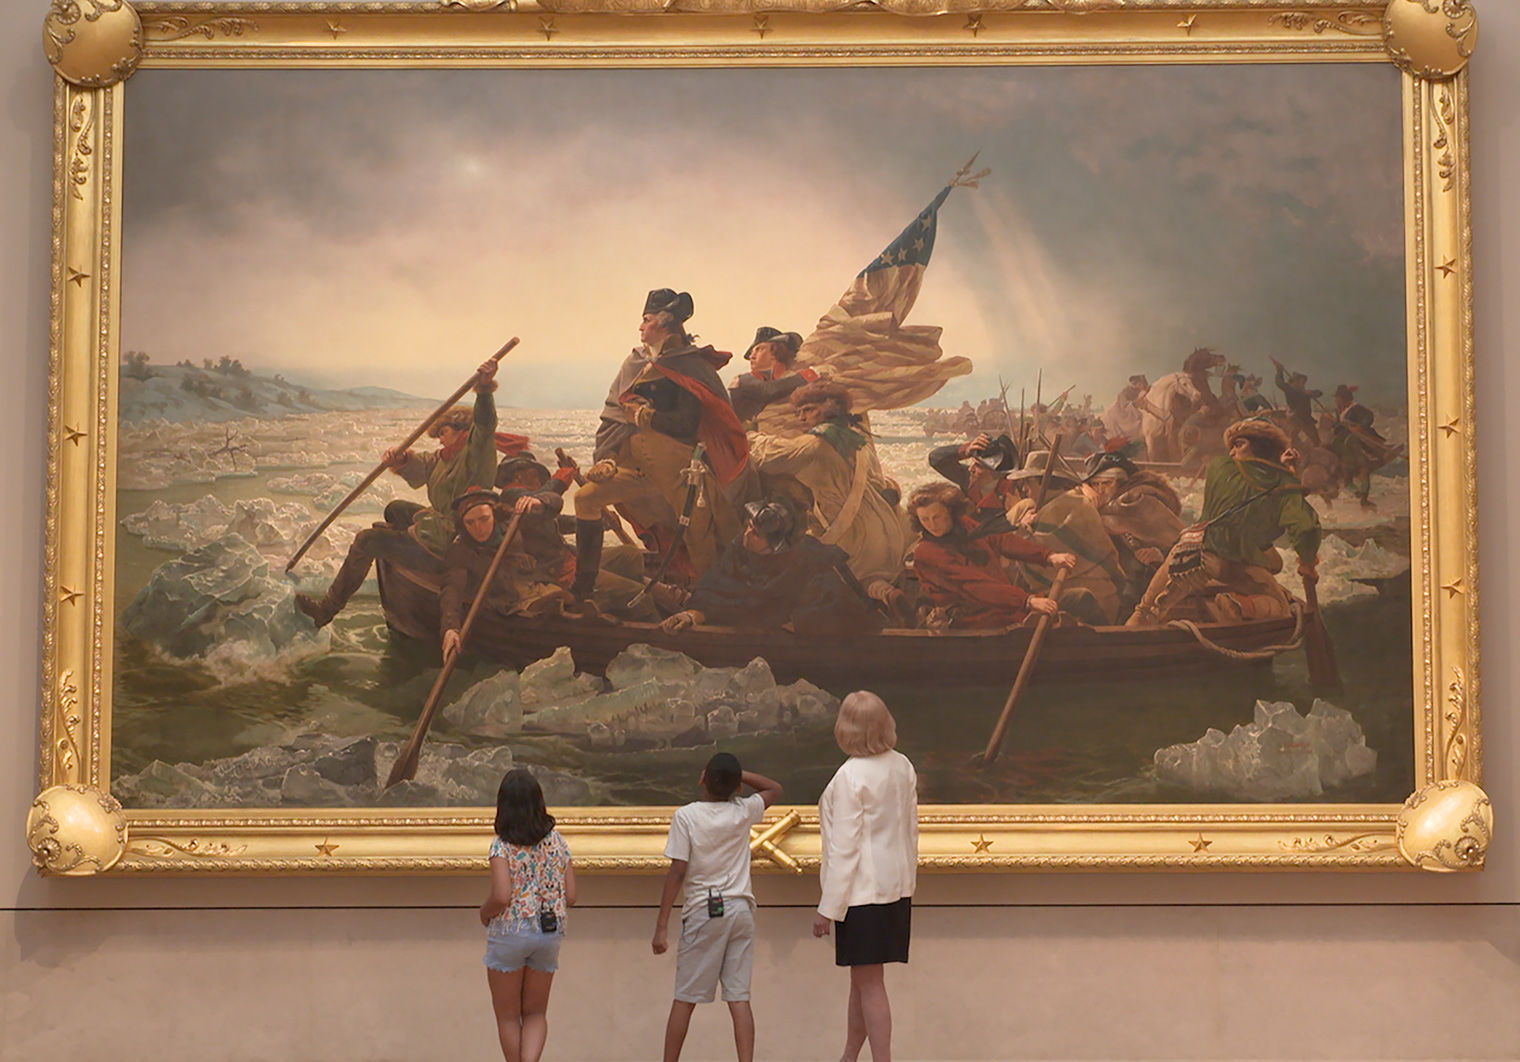 Can A Painting Tell More Than One Story Metkids Looks At Washington Crossing The Delaware The Metropolitan Museum Of Art